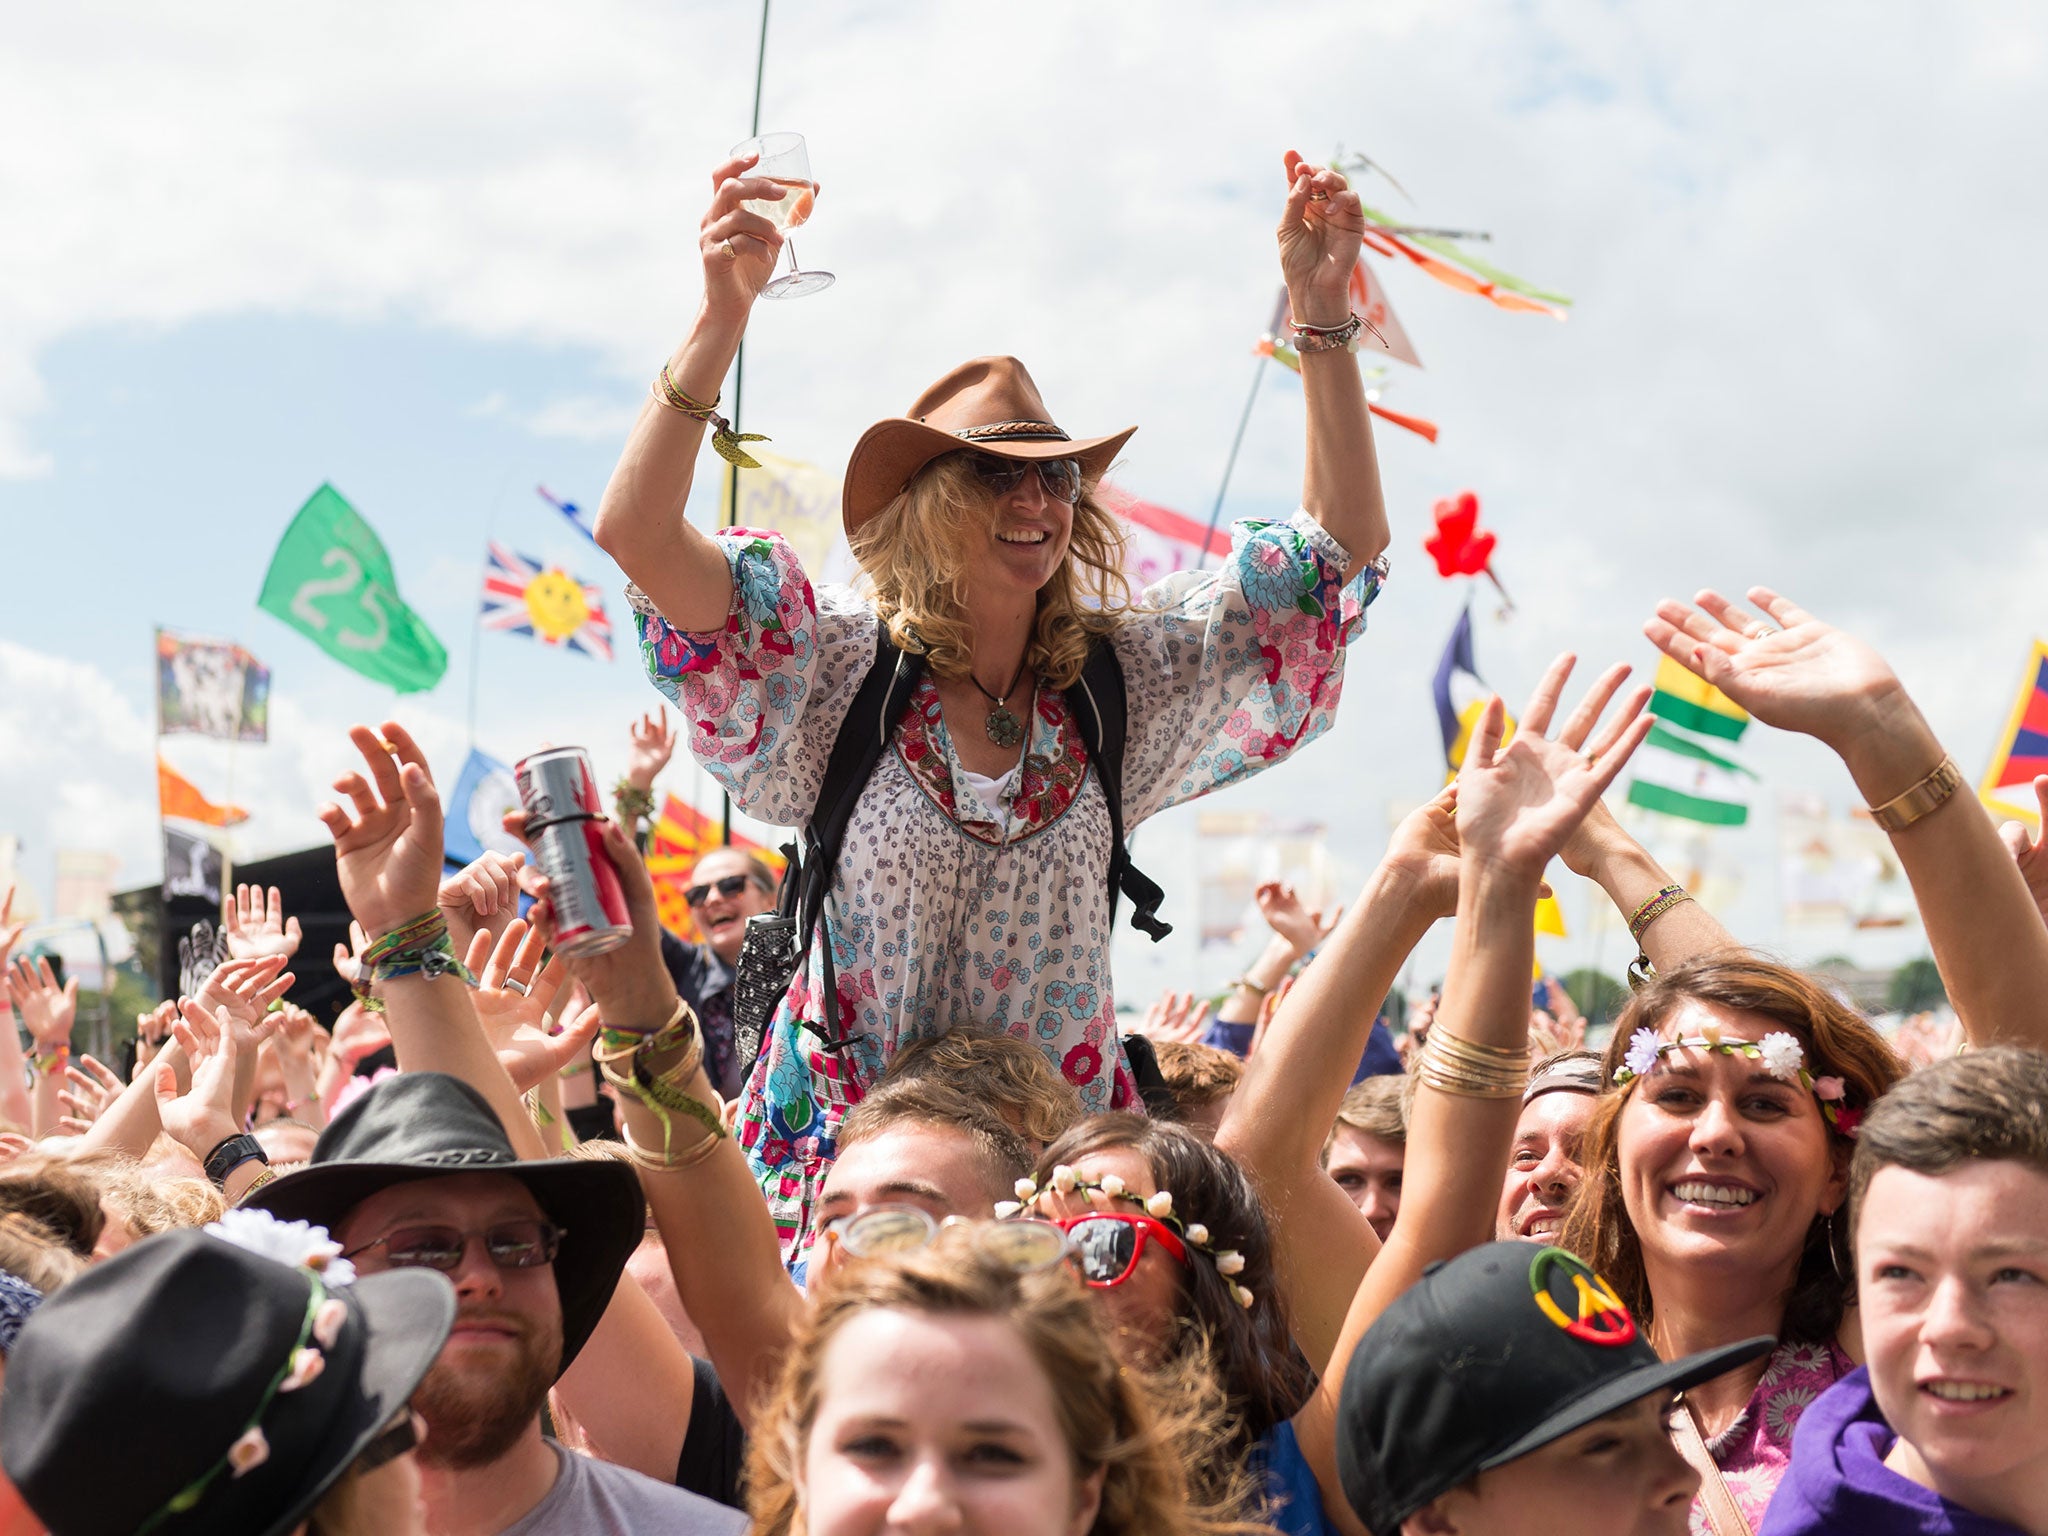 The crowd enjoys the atmosphere during day one of the Glastonbury Festival